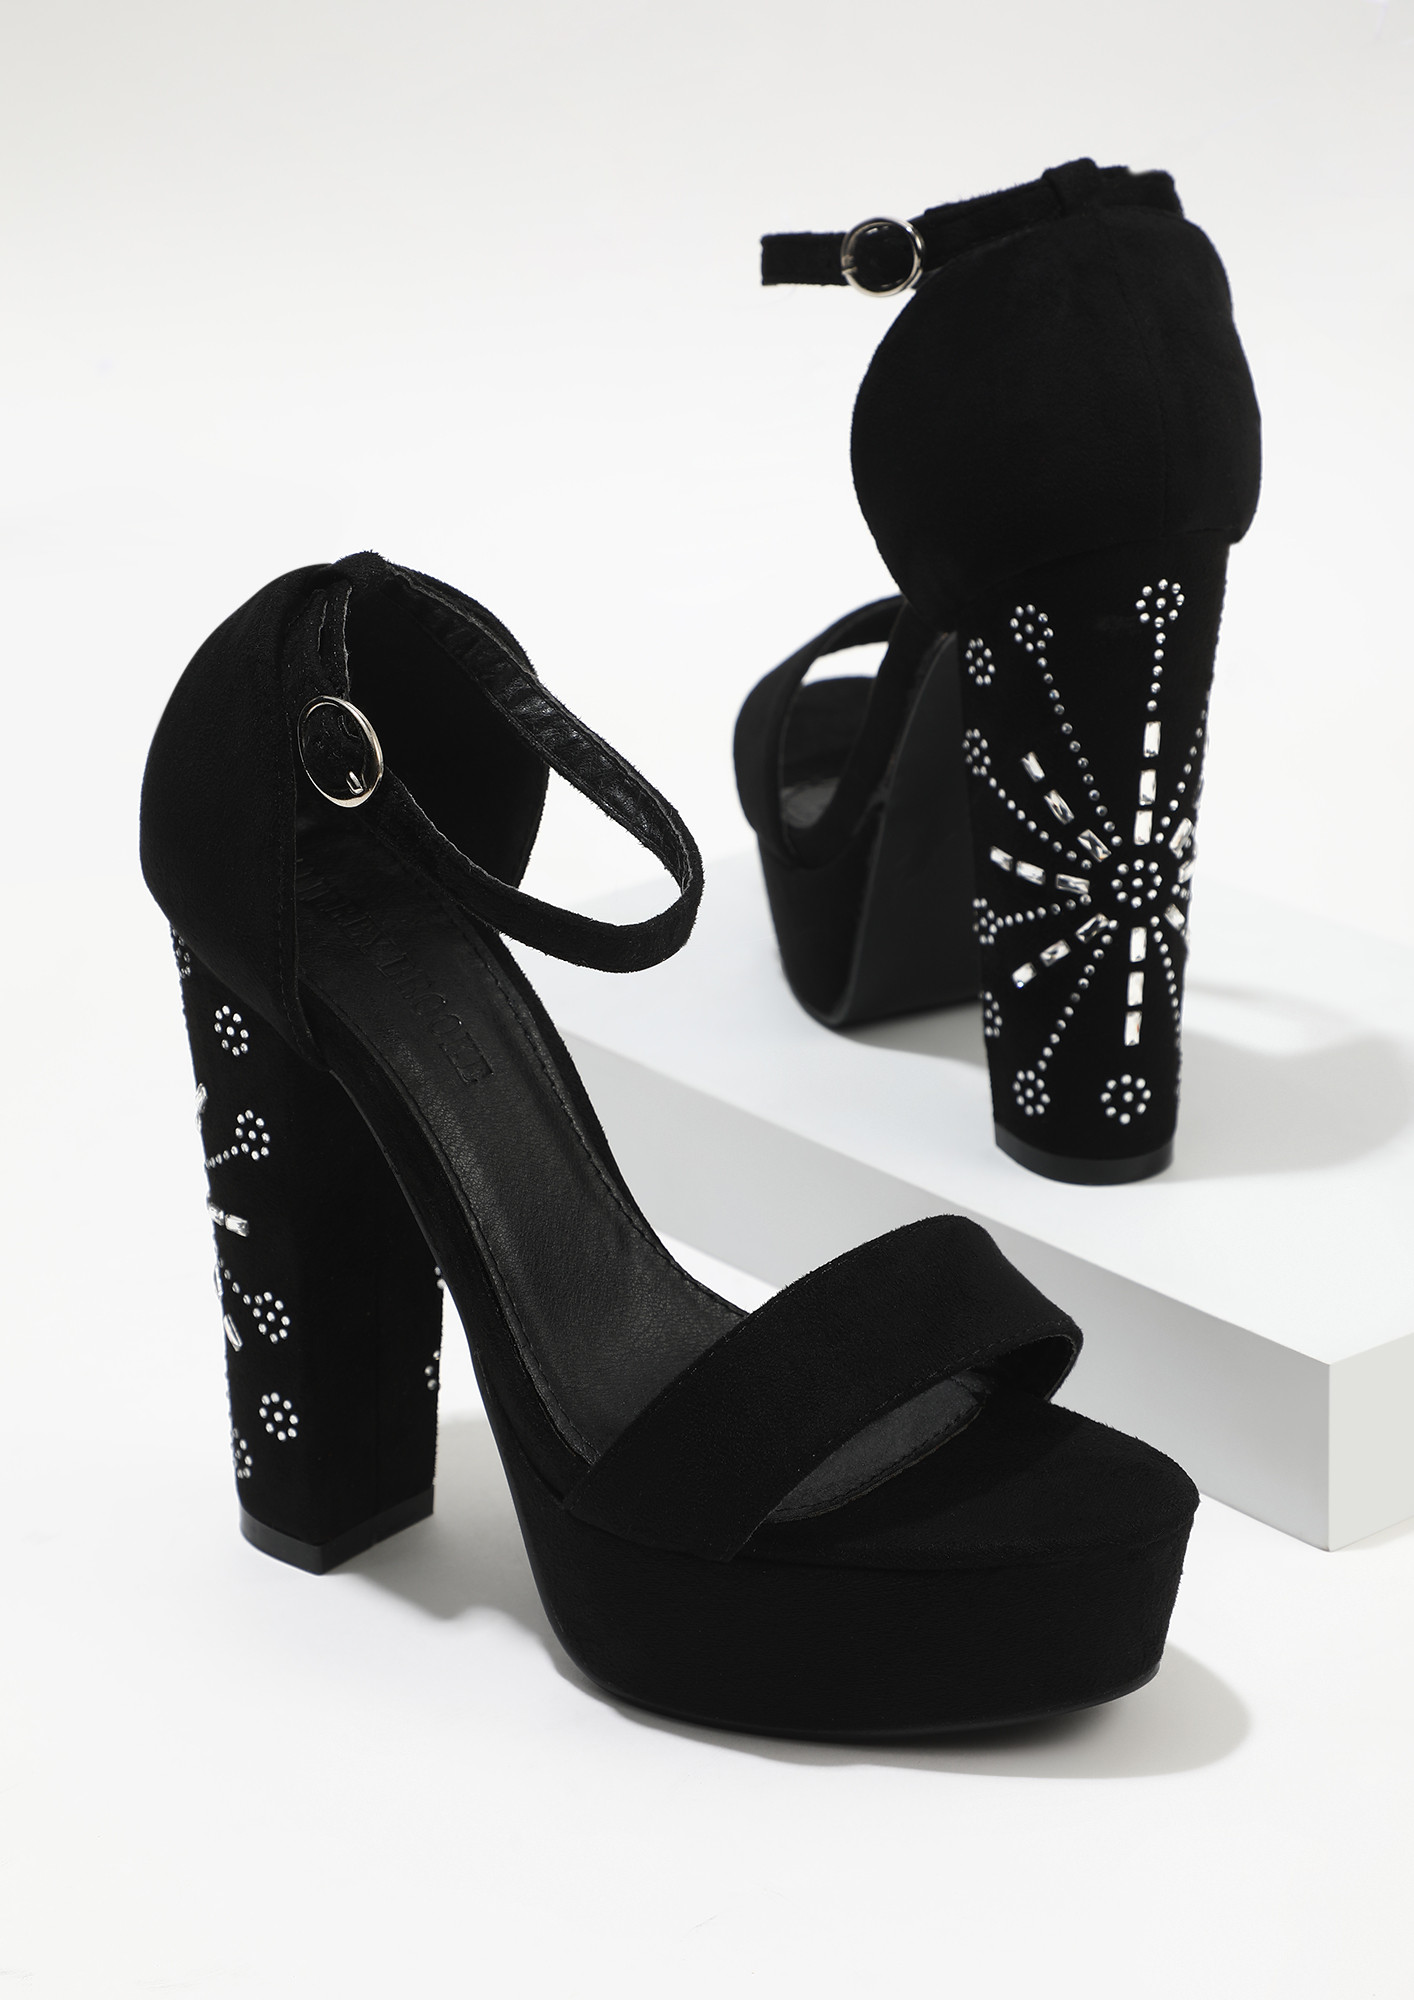 Buy Blinder Black Heels Sandals for Girls and womens at Amazon.in-thanhphatduhoc.com.vn